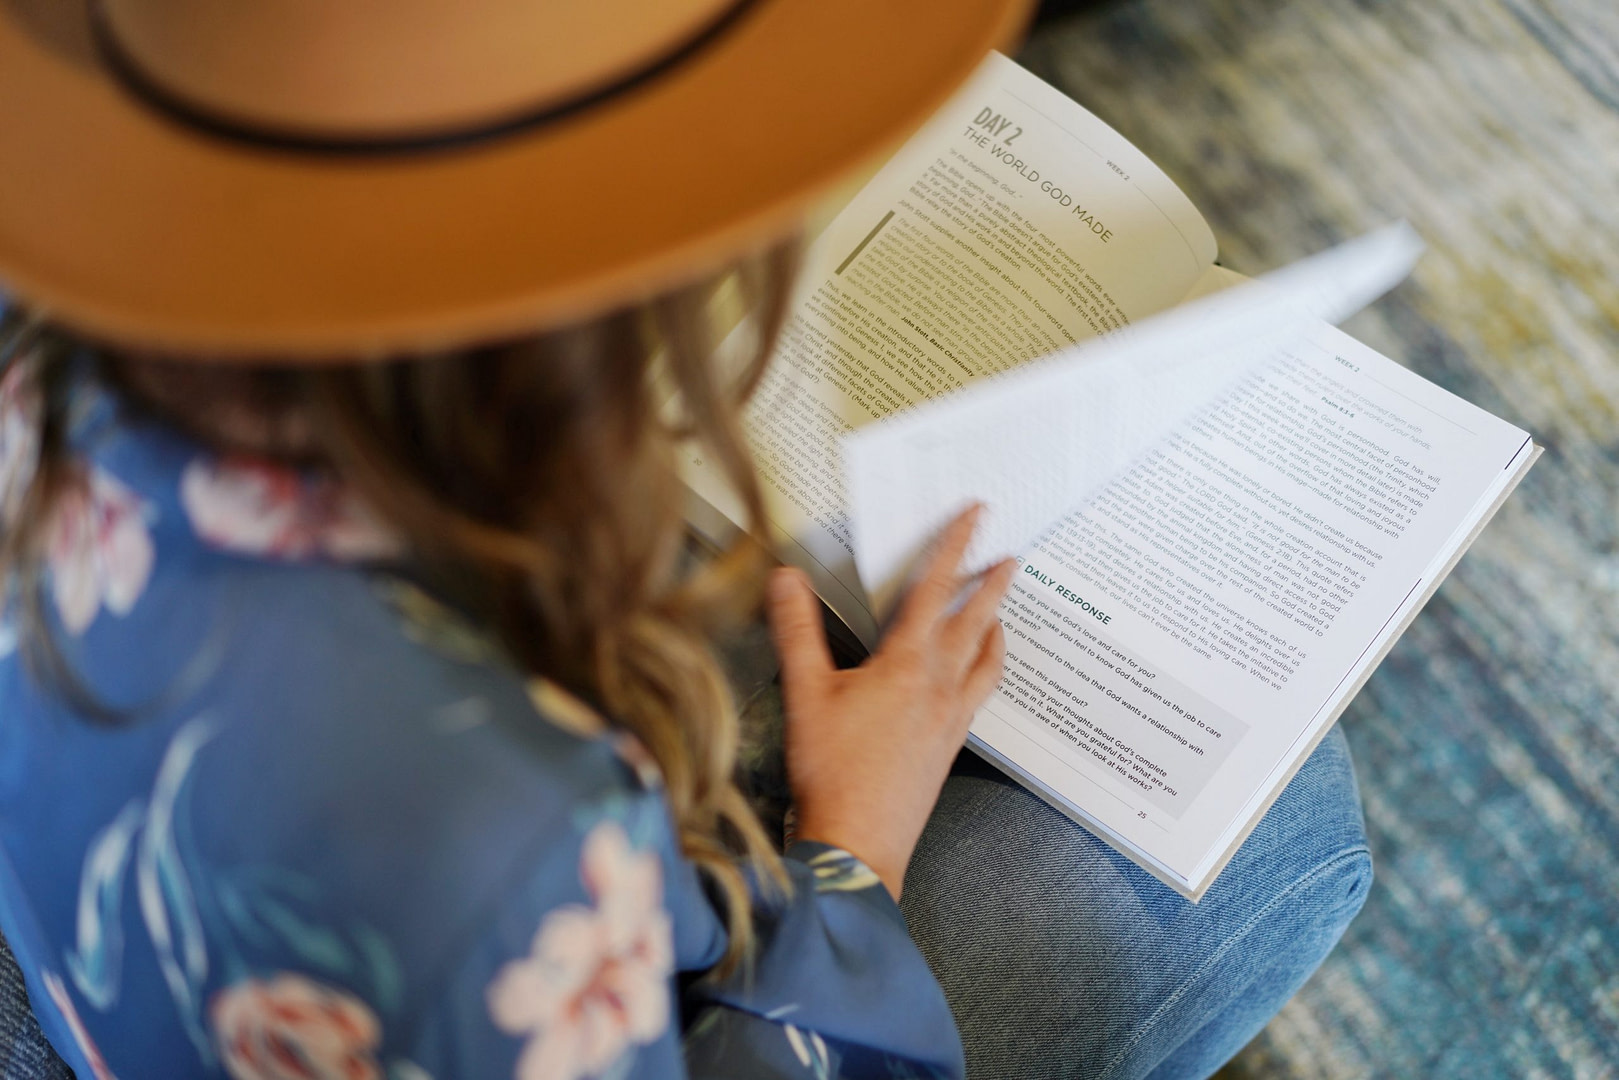 Girl with a brown hat looking down flipping the page of a book